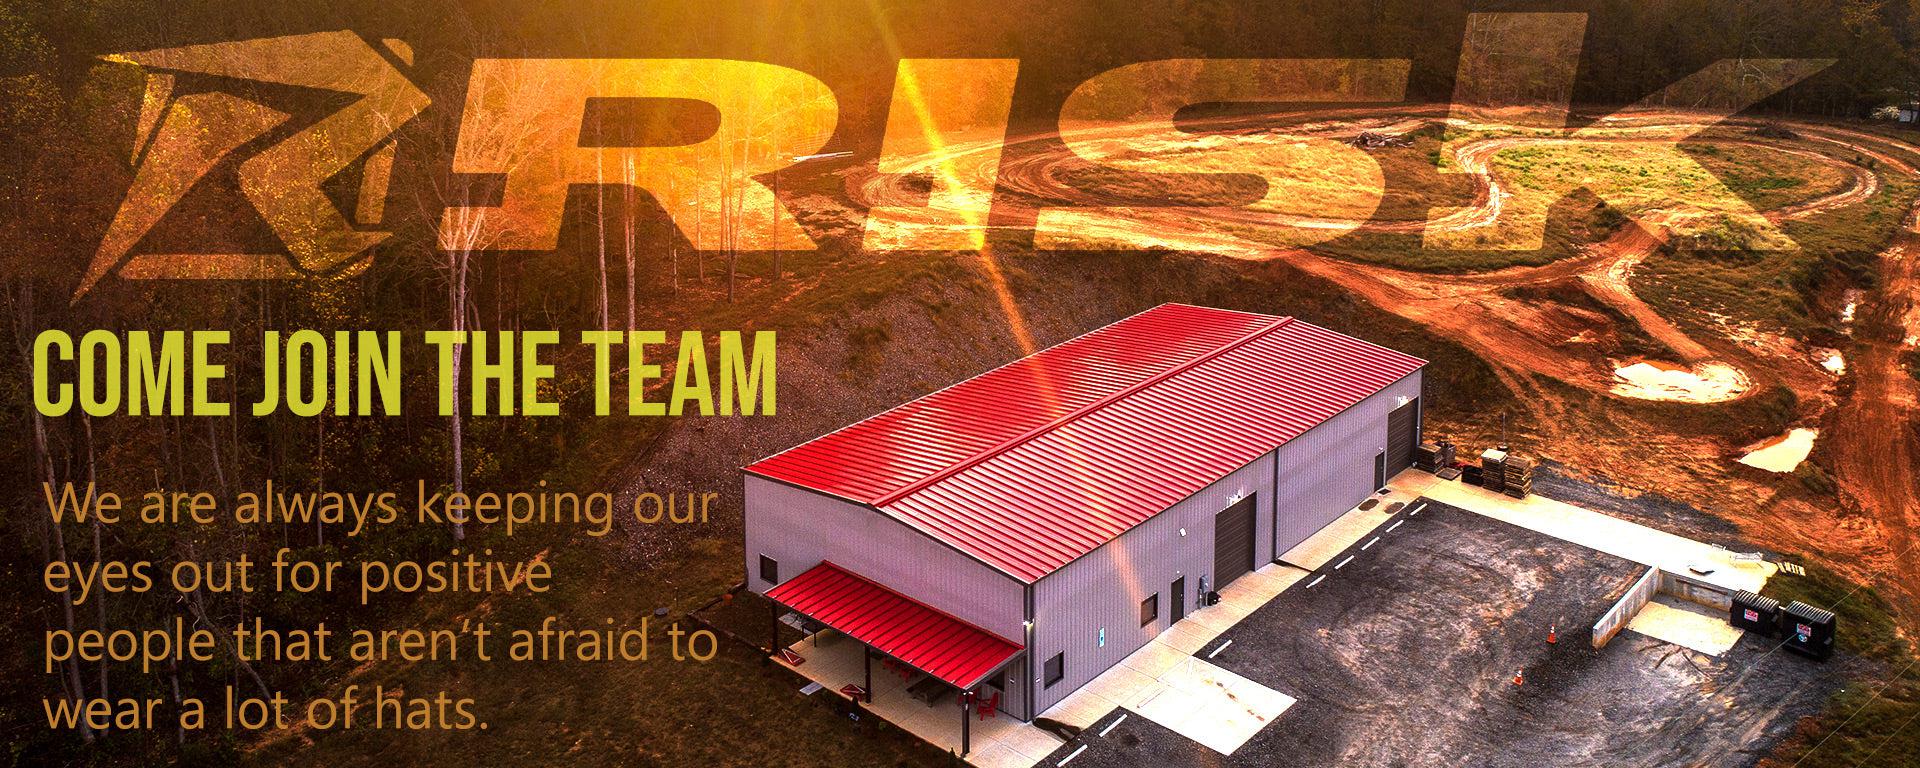 Risk Racing Careers Banner featuring an image of the BISS Headquarters and the Motocross track in the background. Text reads: Come join the team. We are always keeping our eyes out for positive people that aren't afraid to wear a lot of hats.